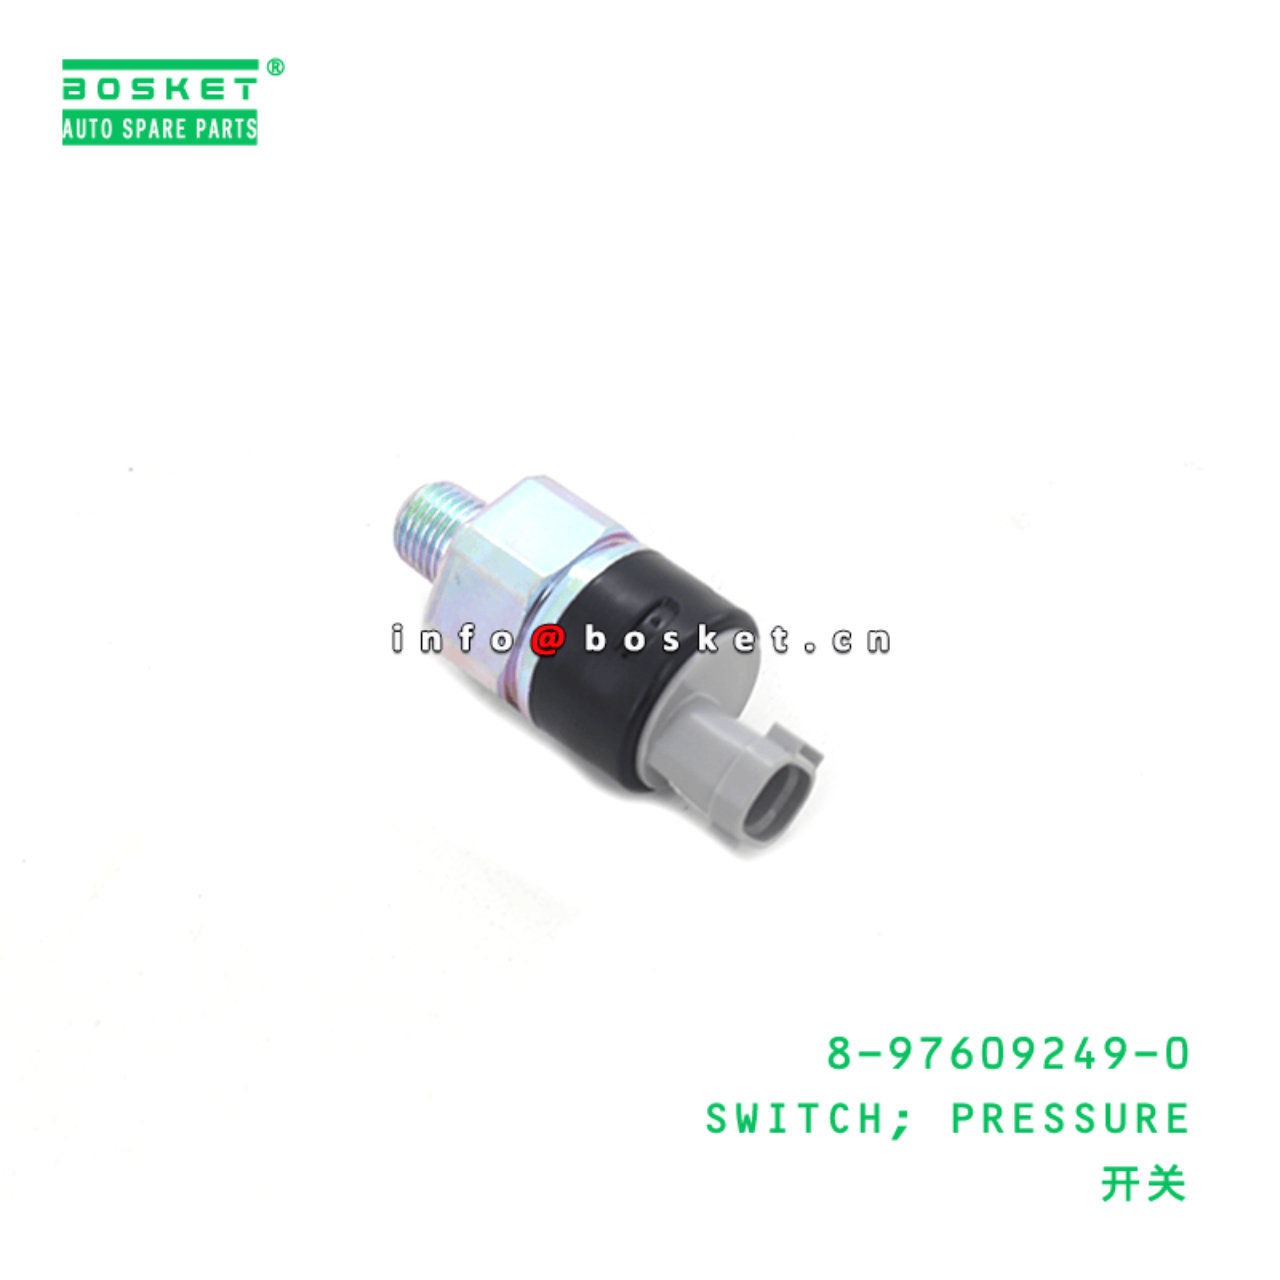  8-97609249-0 Pressure Switch 8976092490 Suitable for ISUZU VC46 